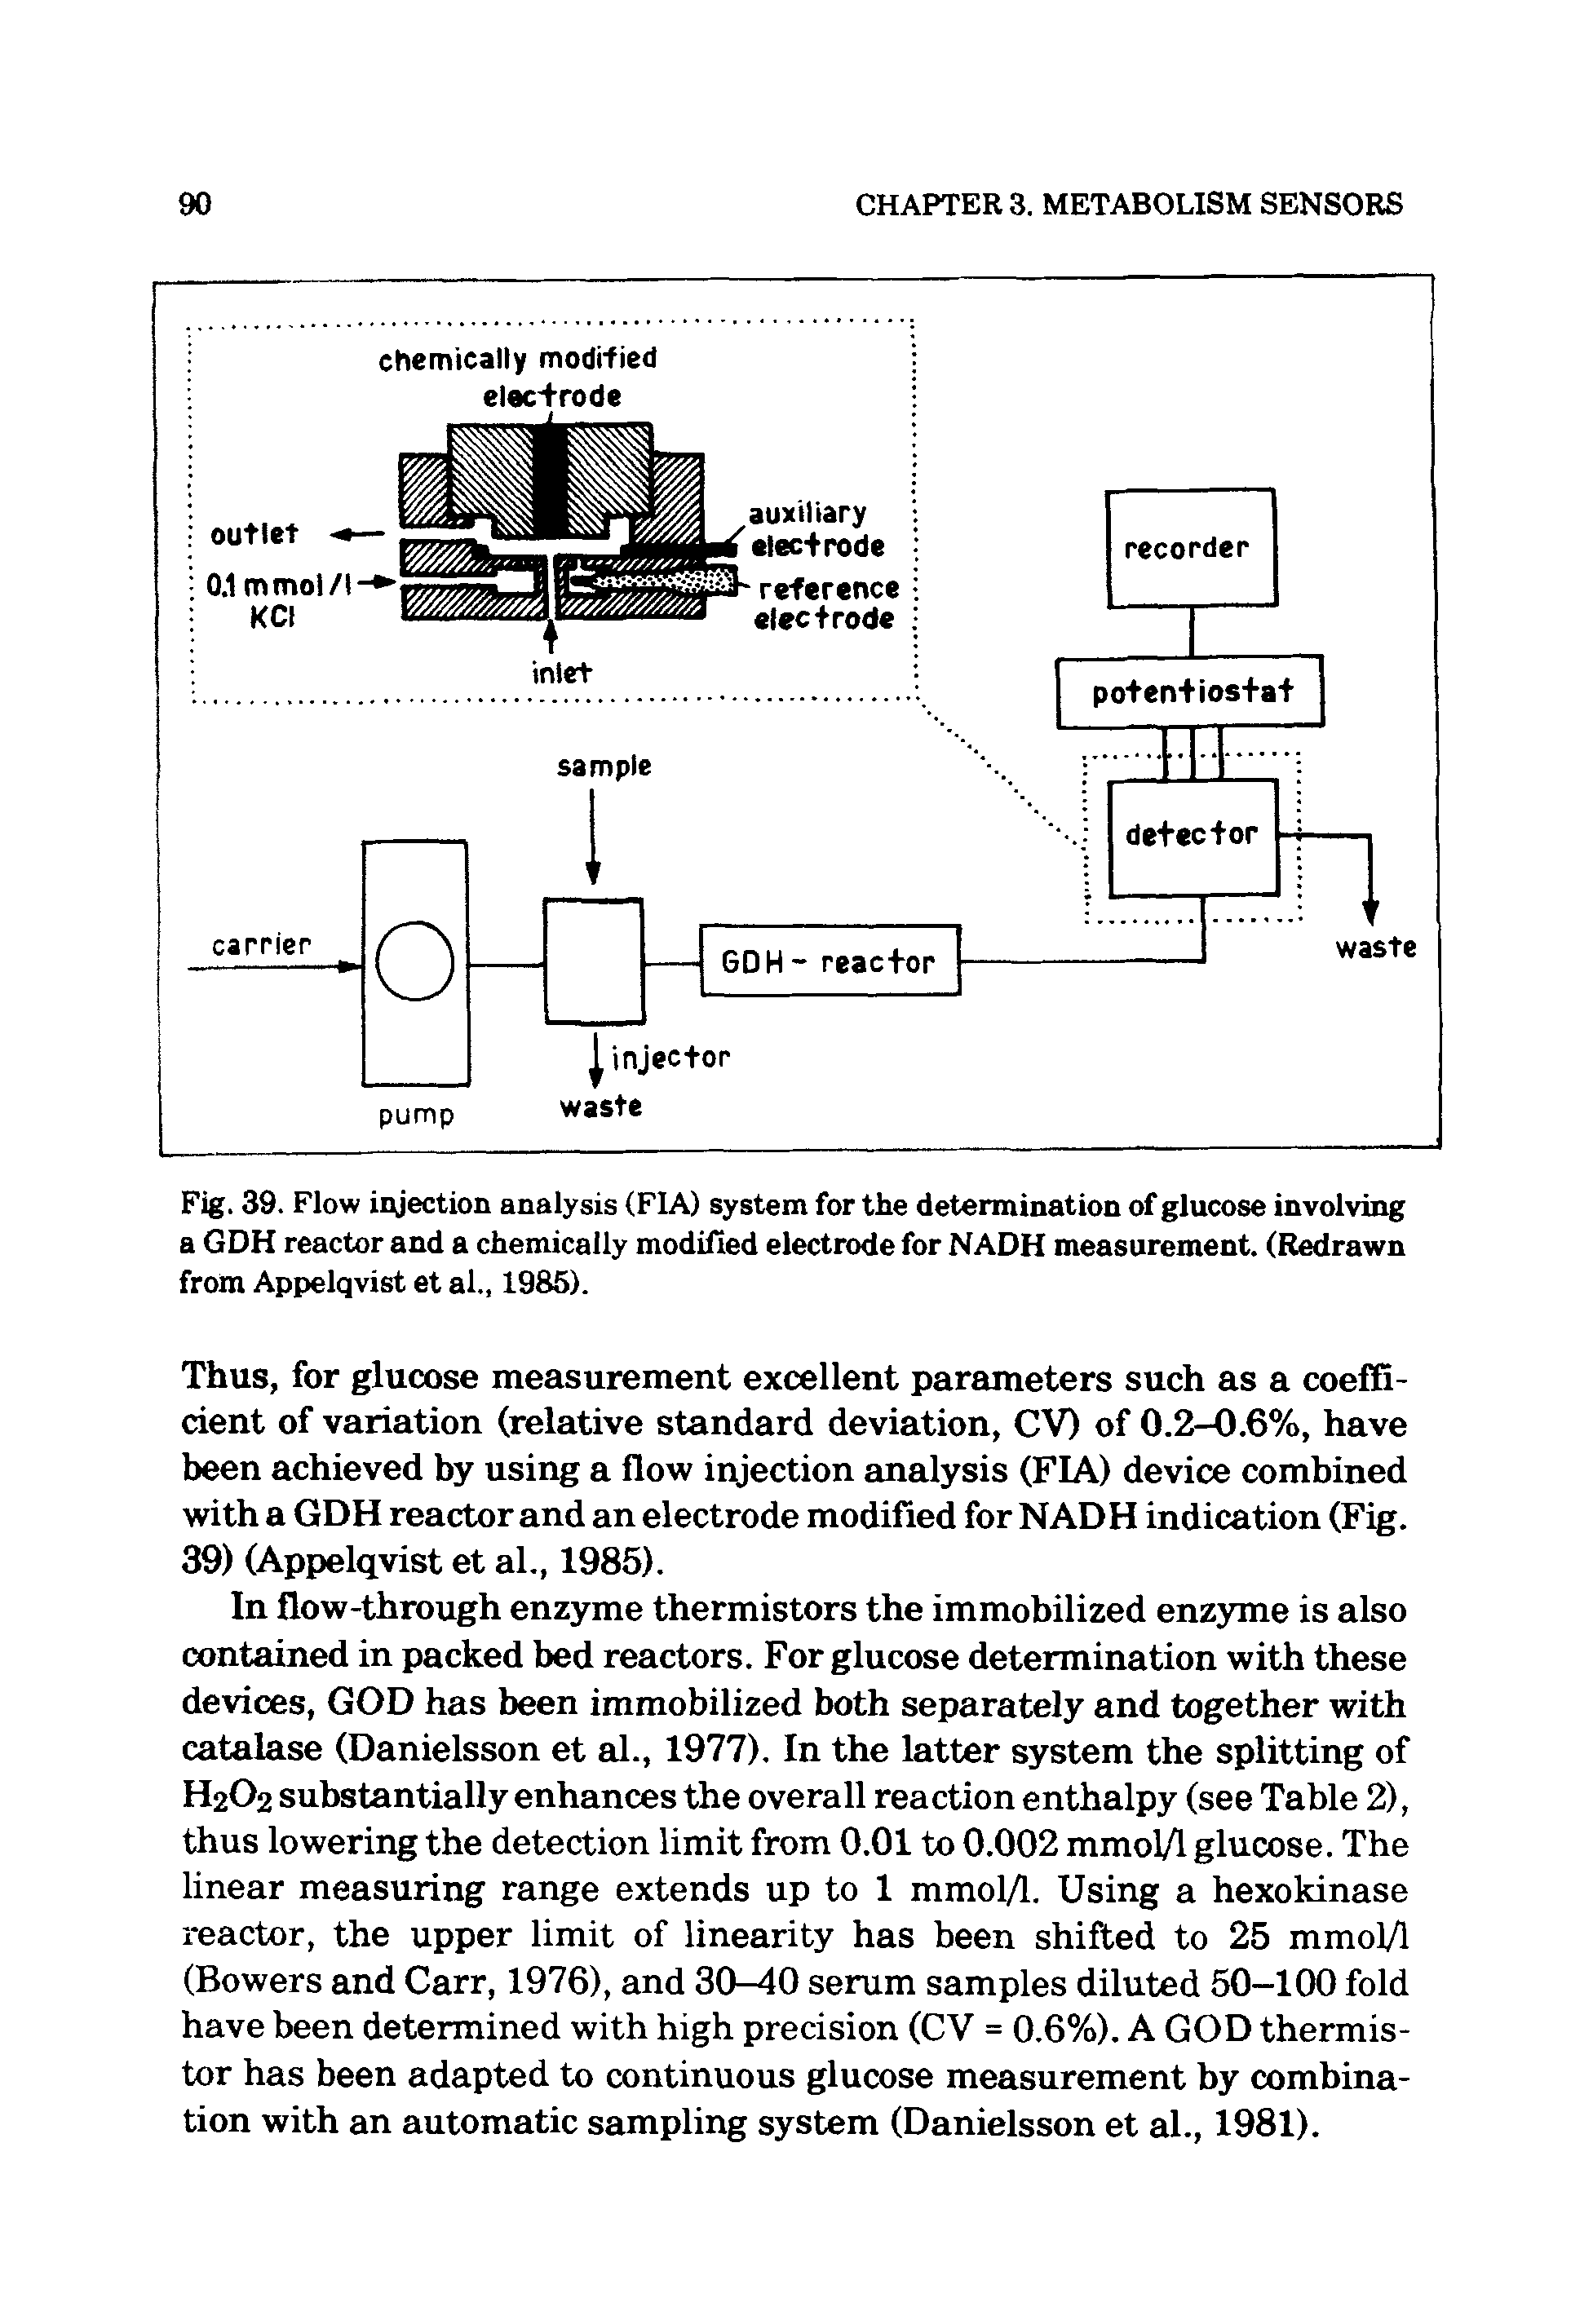 Fig. 39. Flow injection analysis (FIA) system for the determination of glucose involving a GDH reactor and a chemically modified electrode for NADH measurement. (Redrawn from Appelqvist et al 1985).